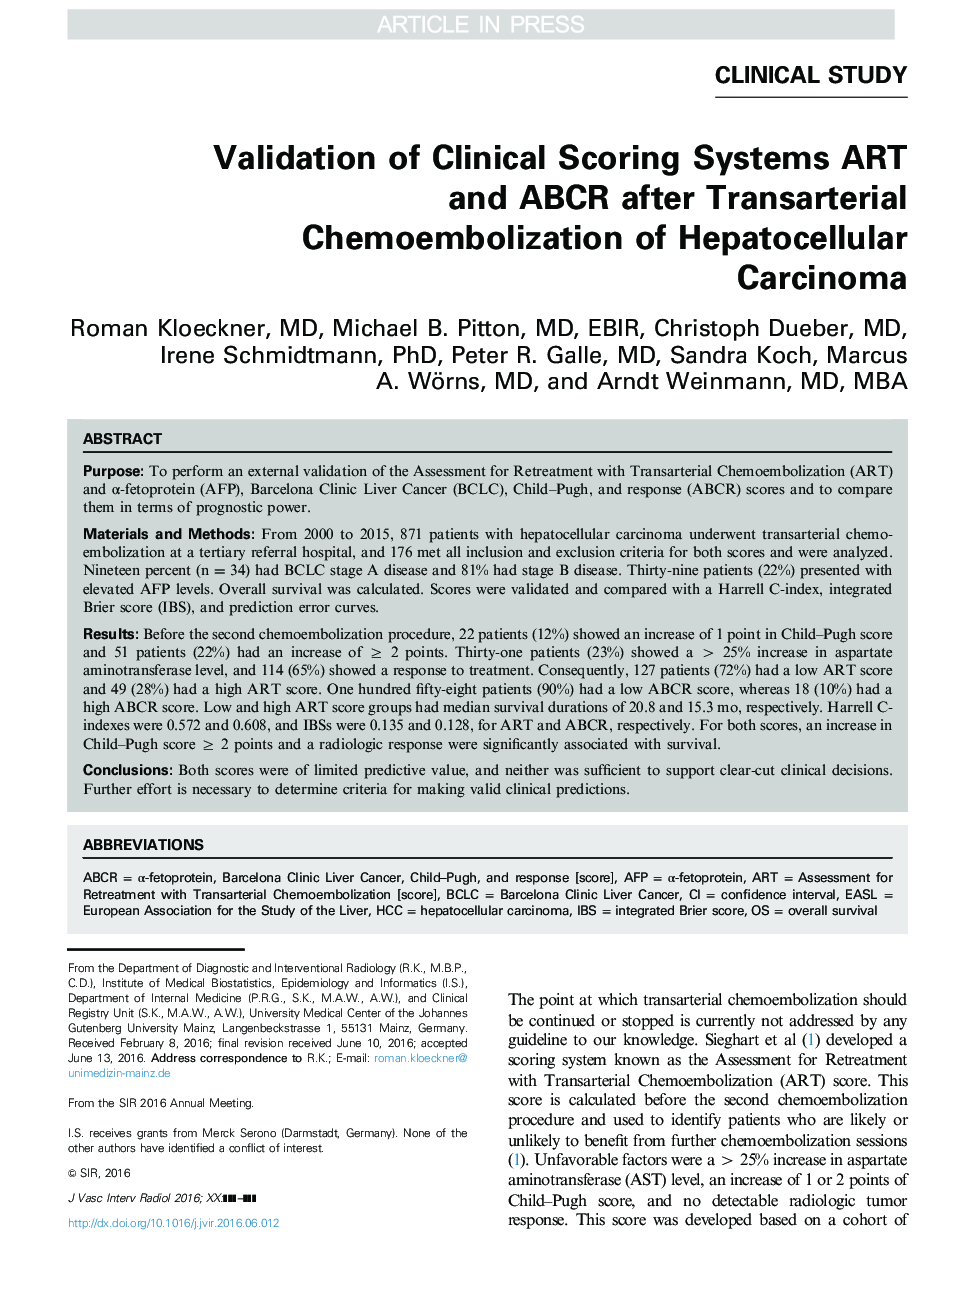 Validation of Clinical Scoring Systems ART and ABCR after Transarterial Chemoembolization of Hepatocellular Carcinoma